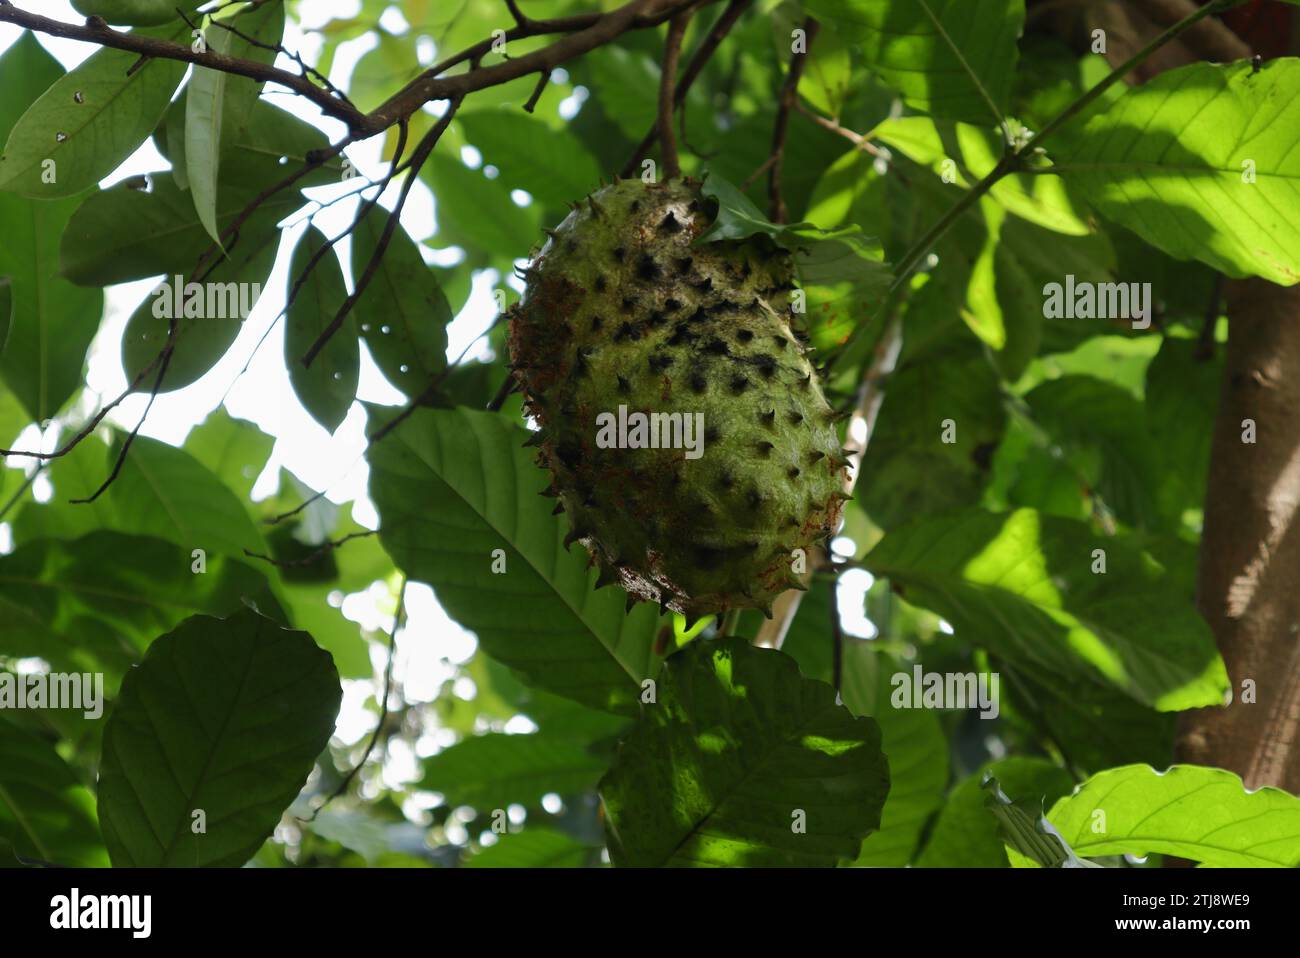 Low angle view of a hanging mature Soursop fruit (Annona Muricata) with the Weaver ants on the prickly fruit surface Stock Photo